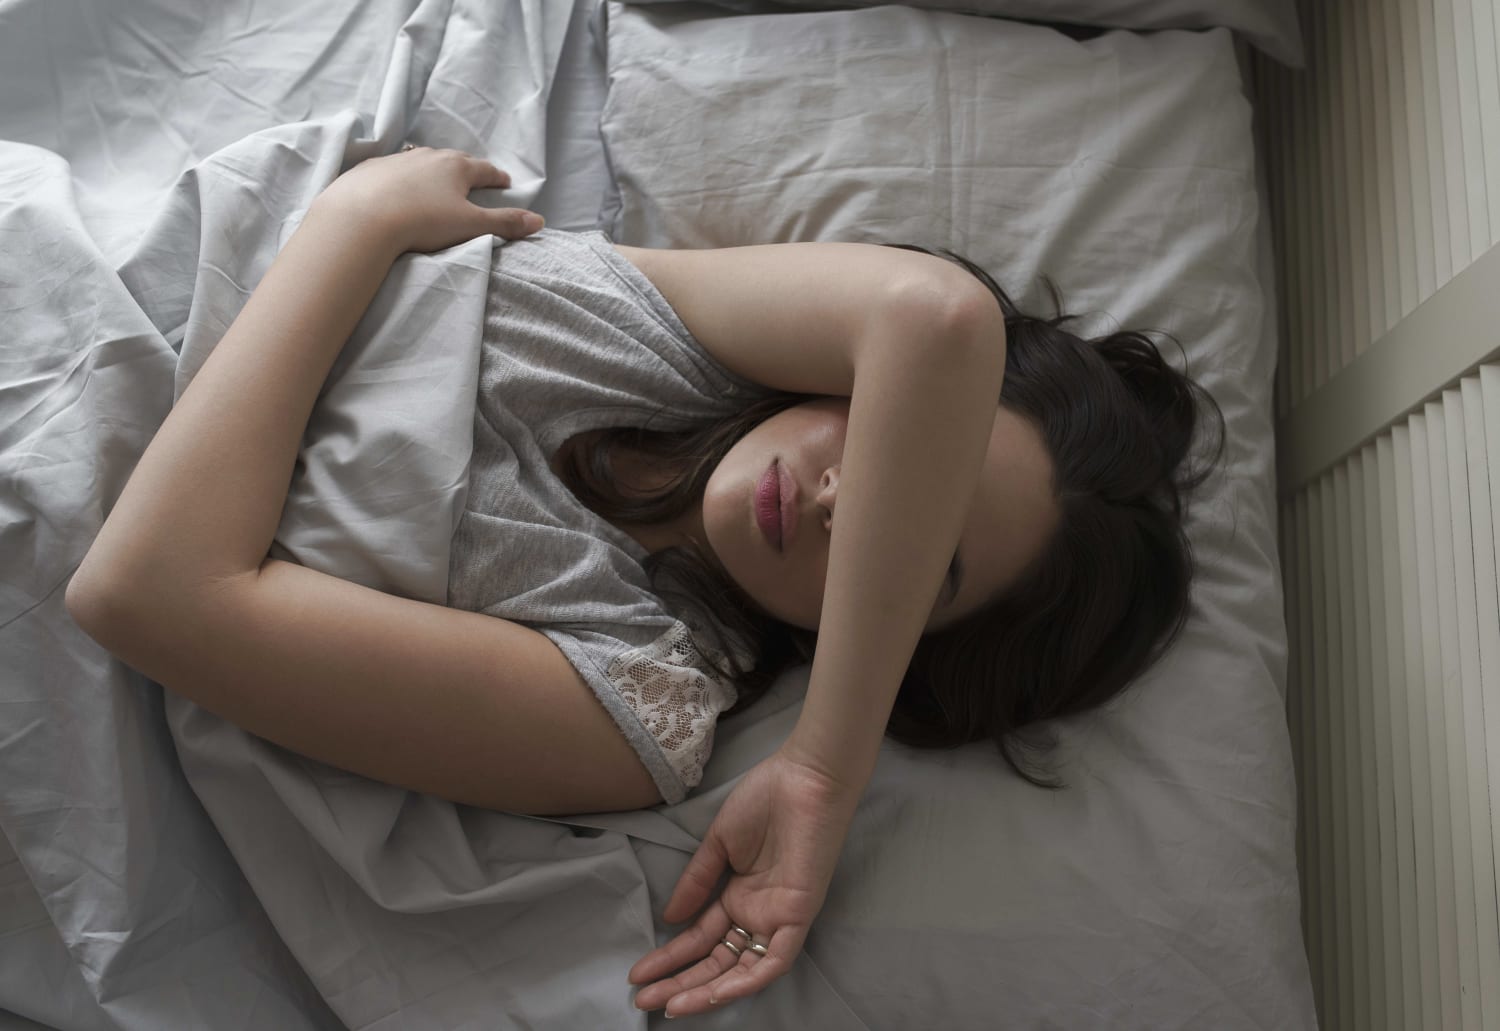 You might not need as much sleep as you think